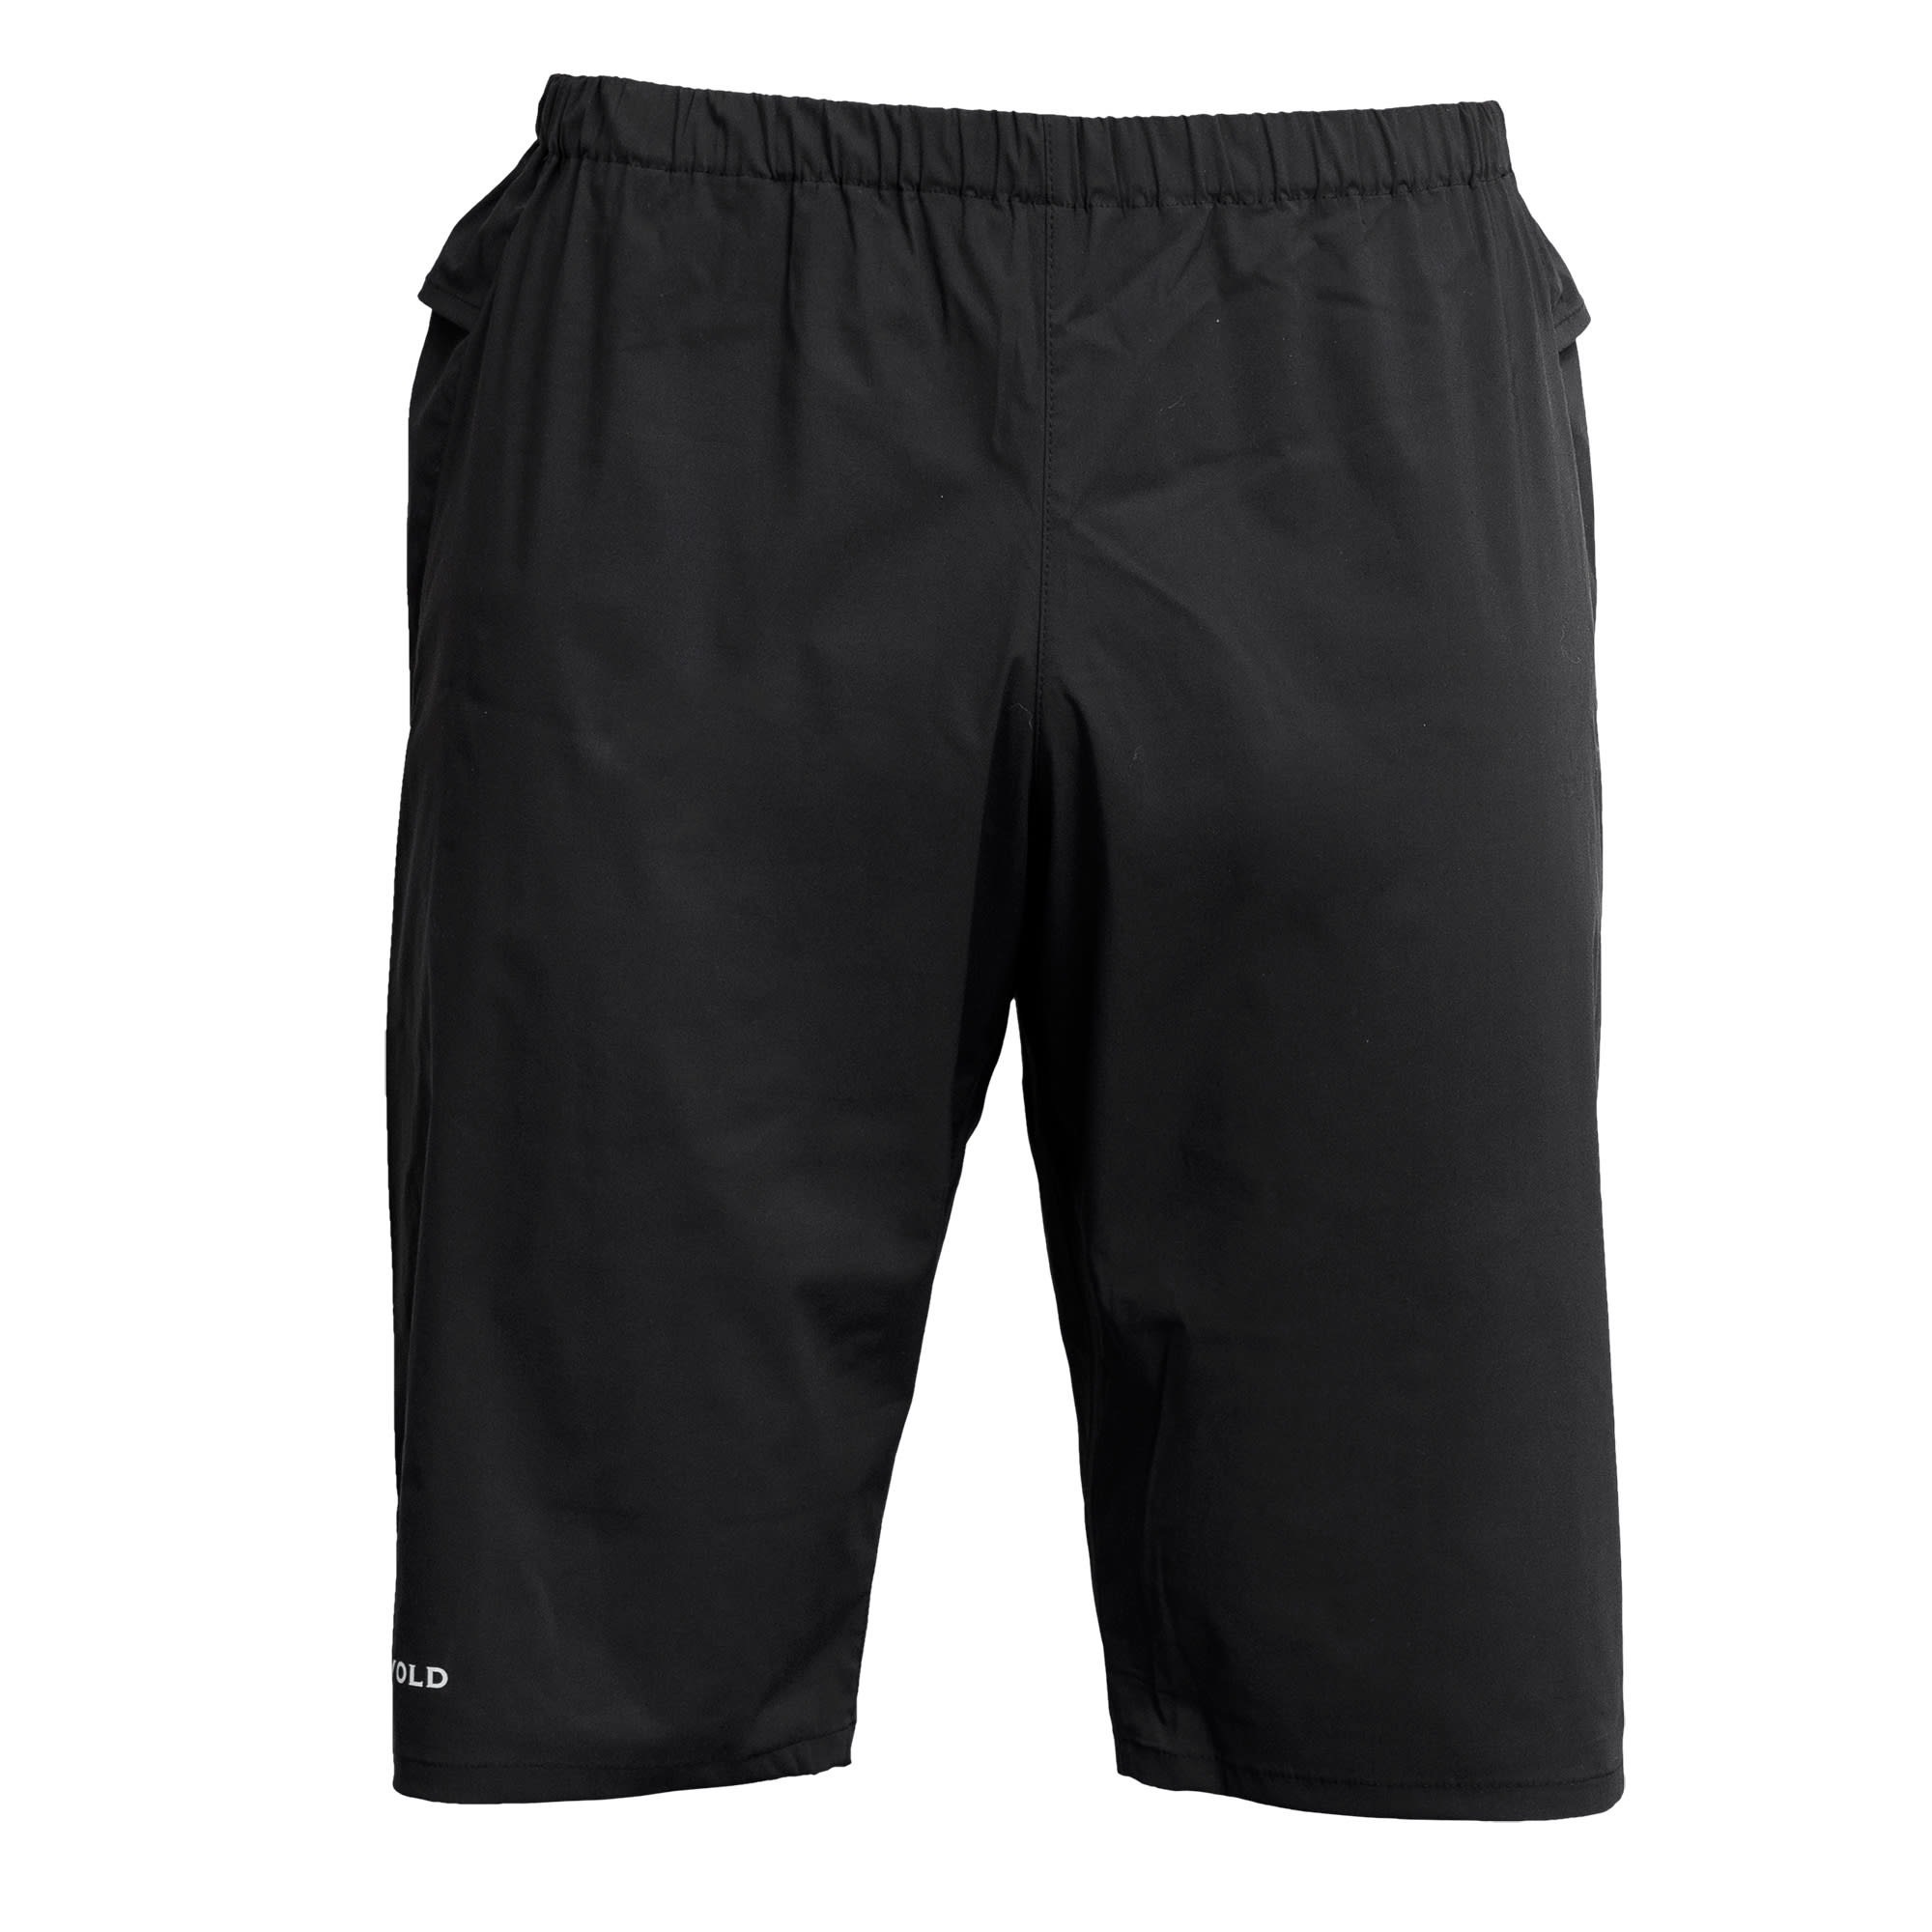 Buy Devold Running Man Shorts from Outnorth